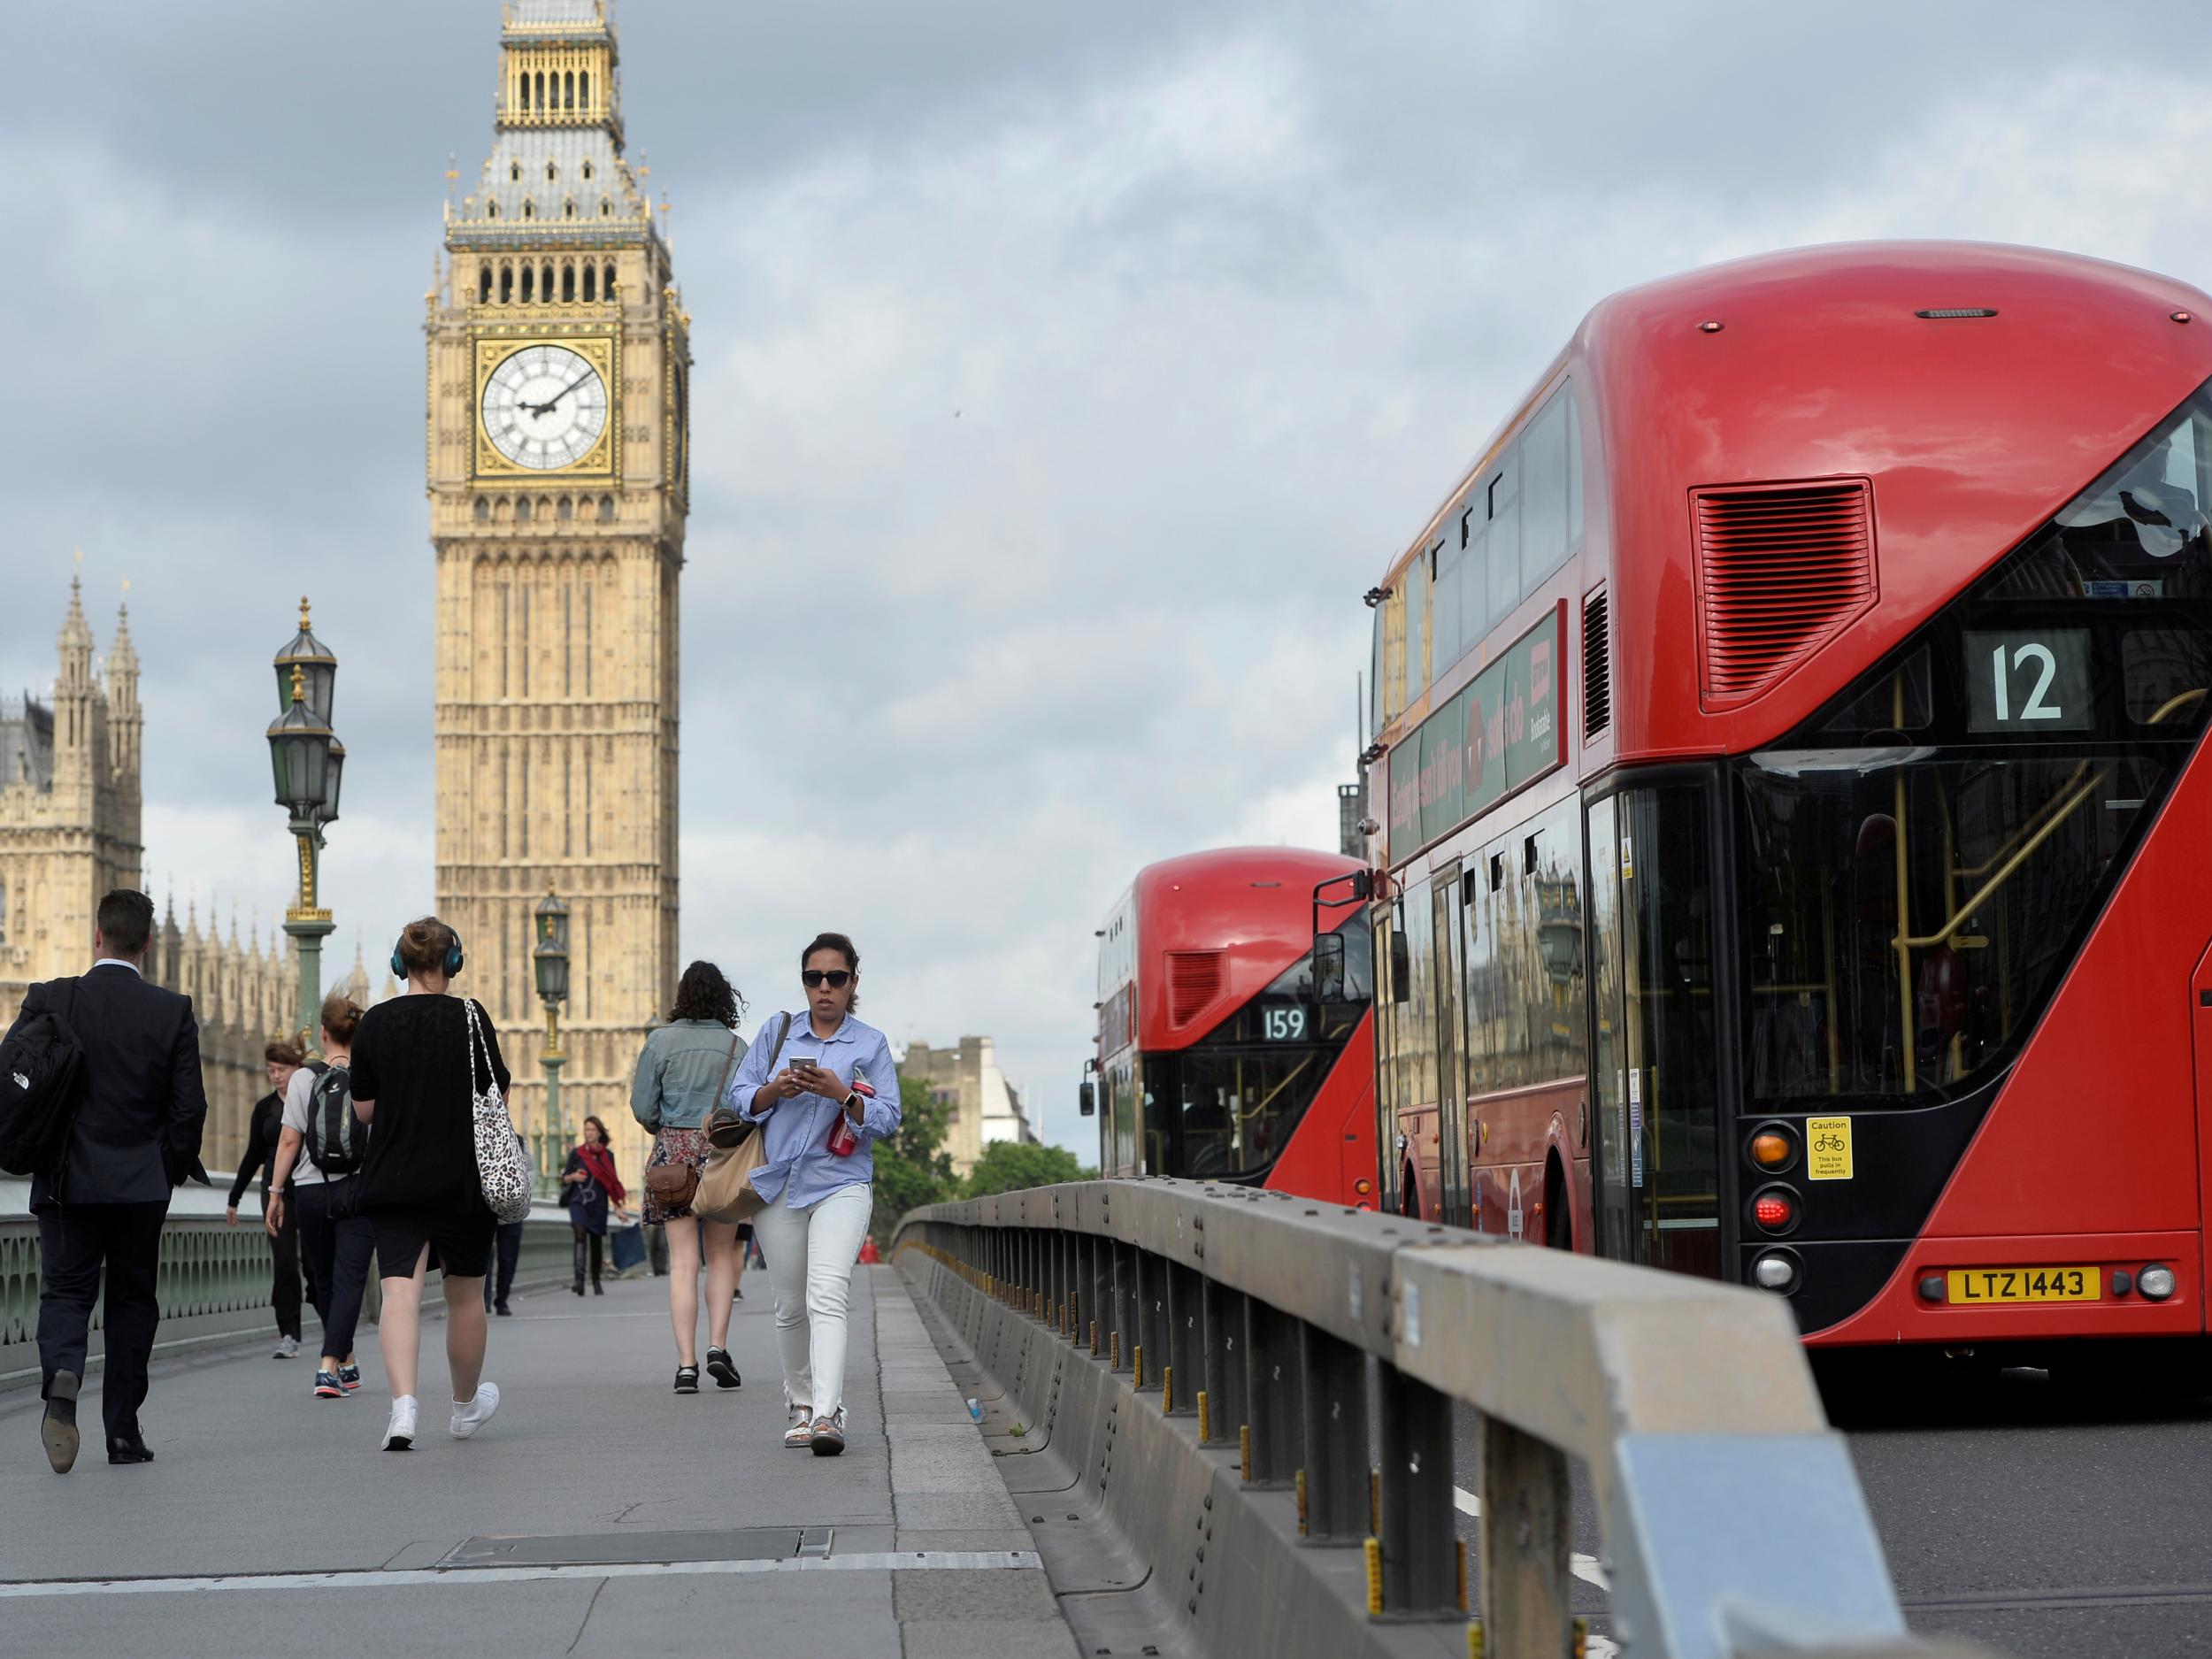 London authorities introduced barriers following the attack at Westminster Bridge